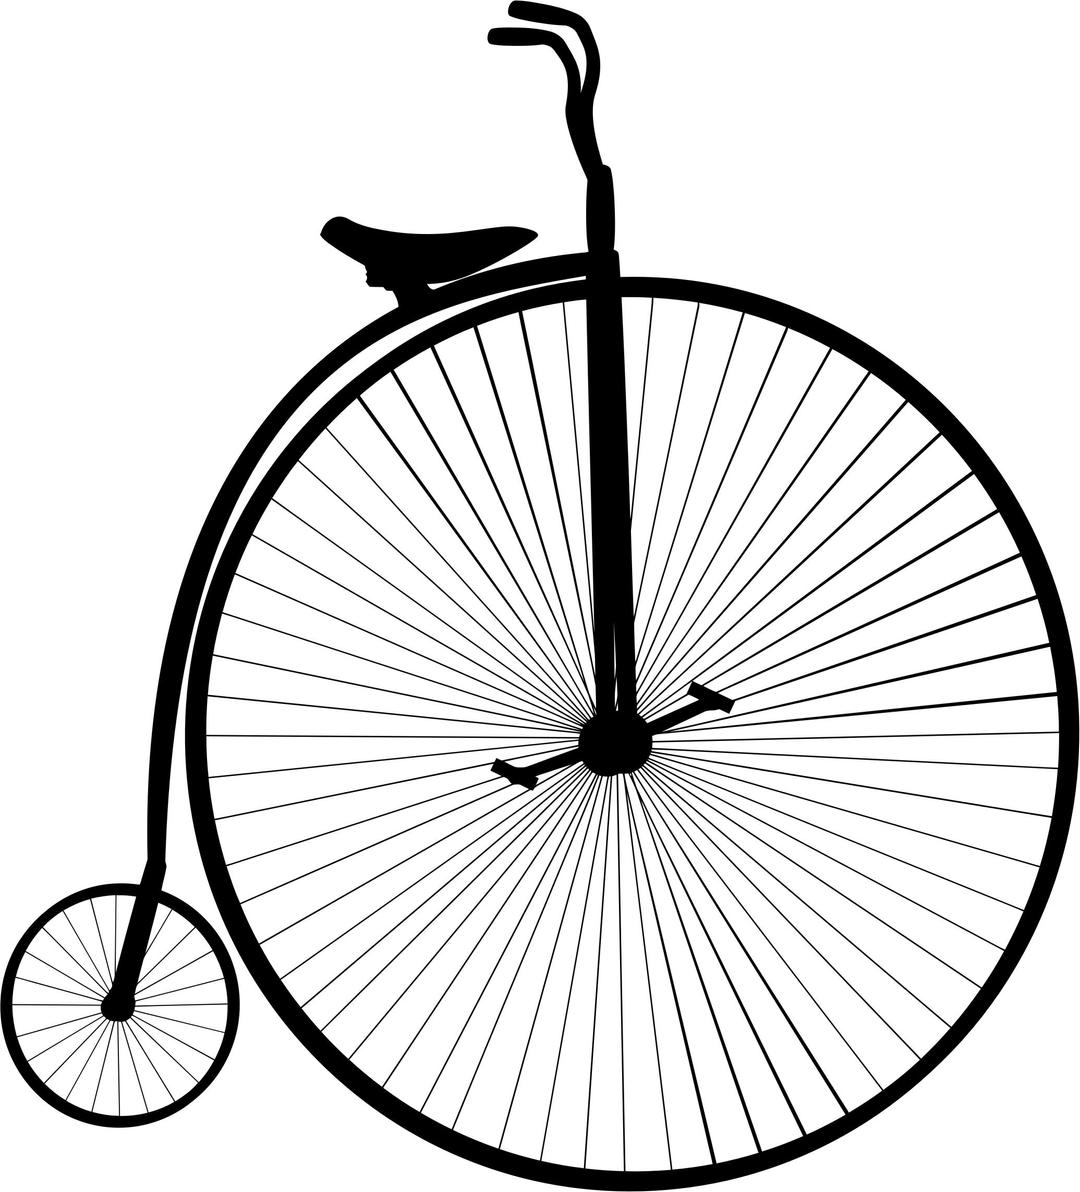 Penny Farthing (Large Small Wheels) Bicycle Silhouette png transparent